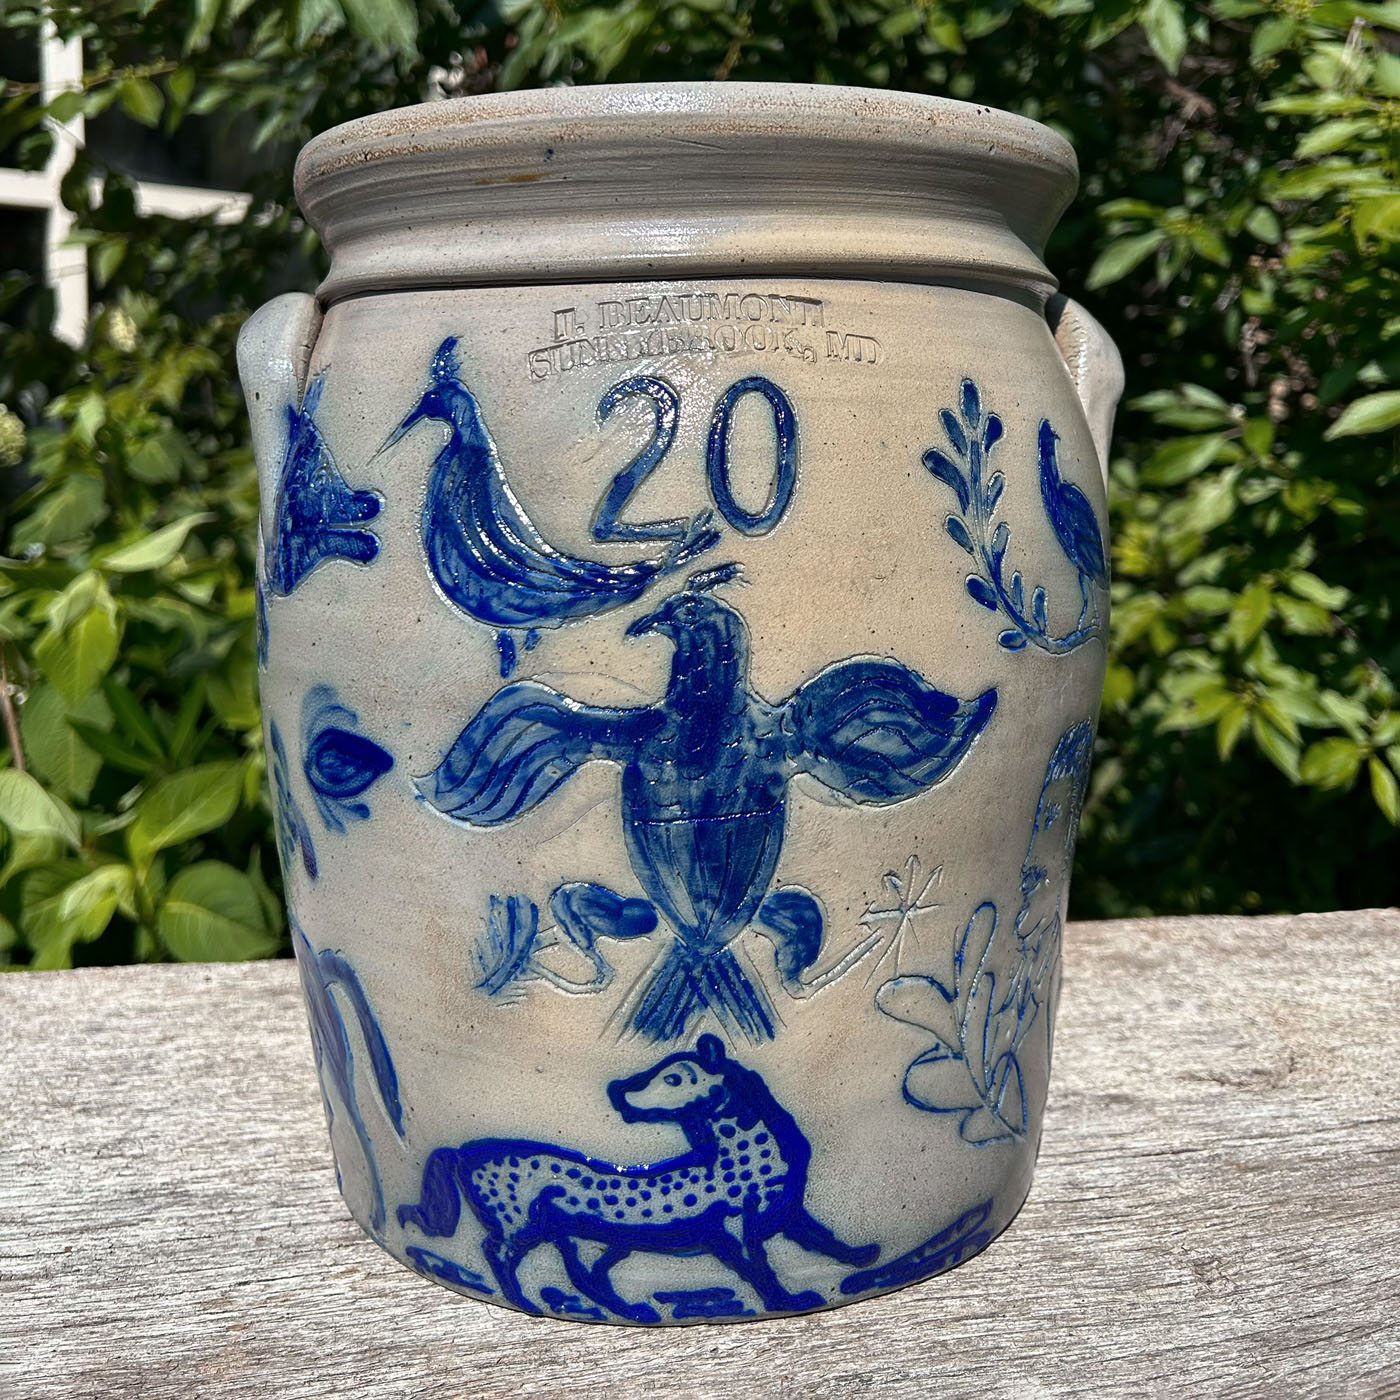 20th Anniversary Auction Commemorative Stoneware Jar by Jerry Beaumont and Mark Zipp